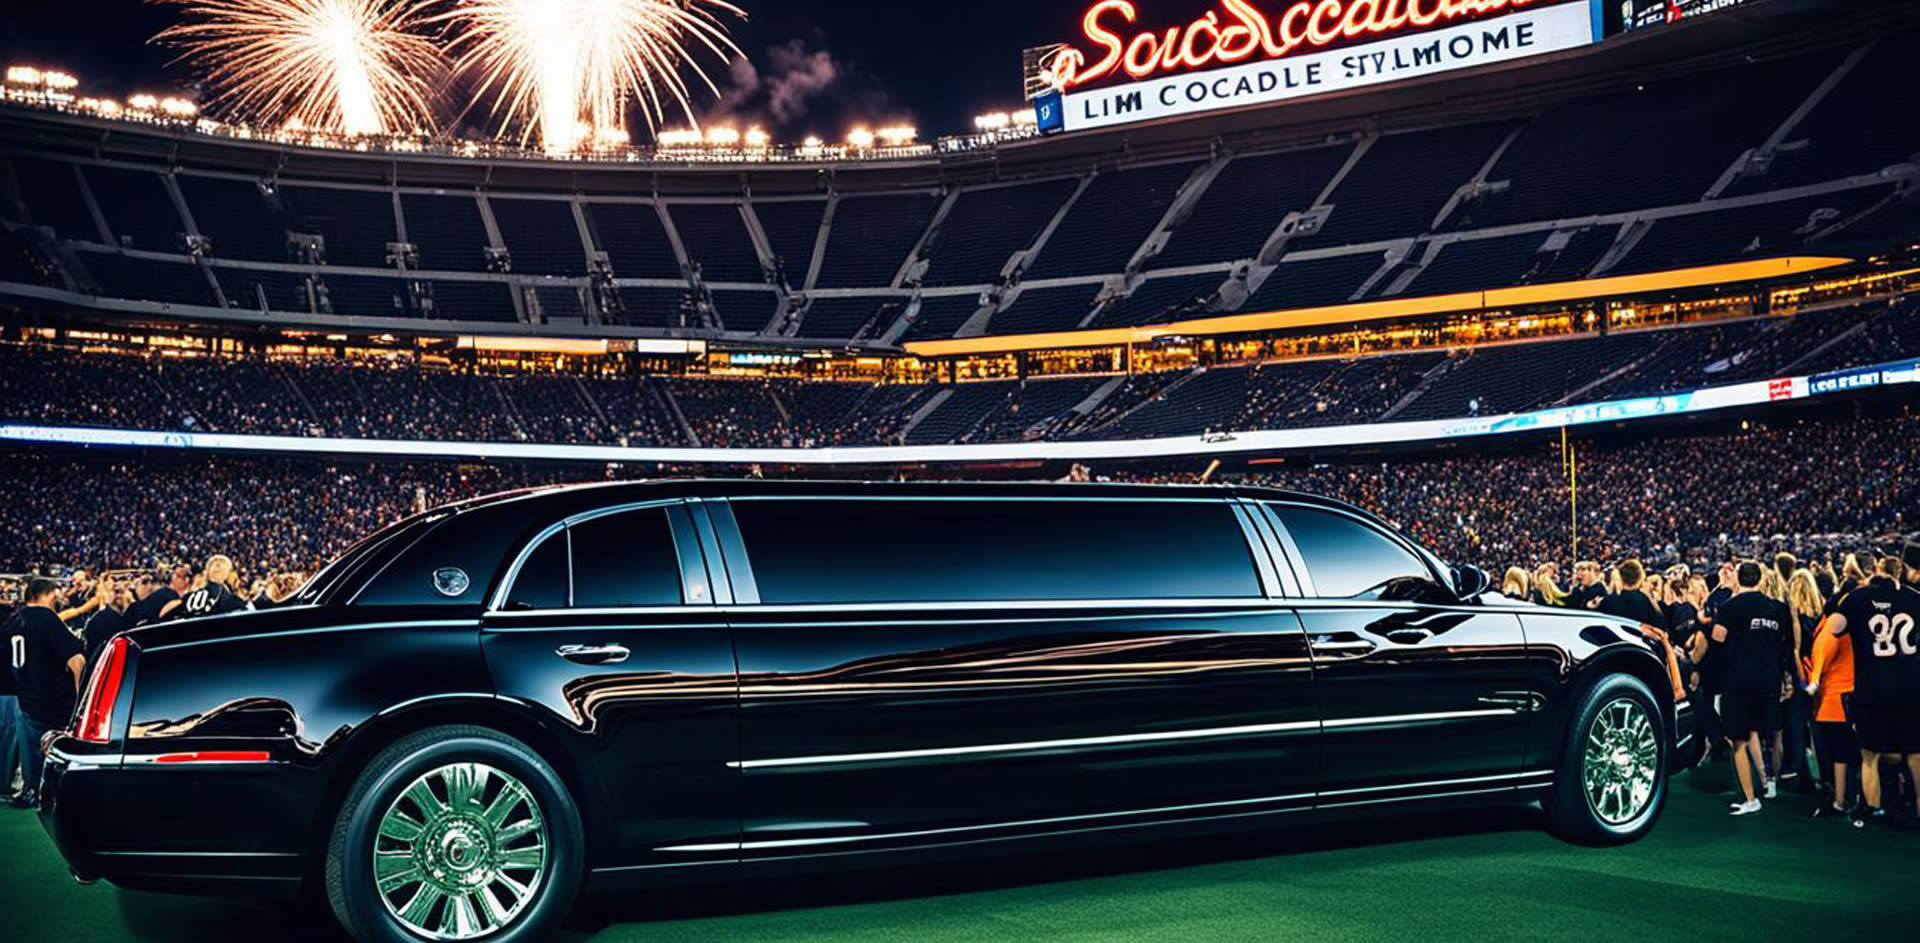 Scottsdale limo service at sporting event